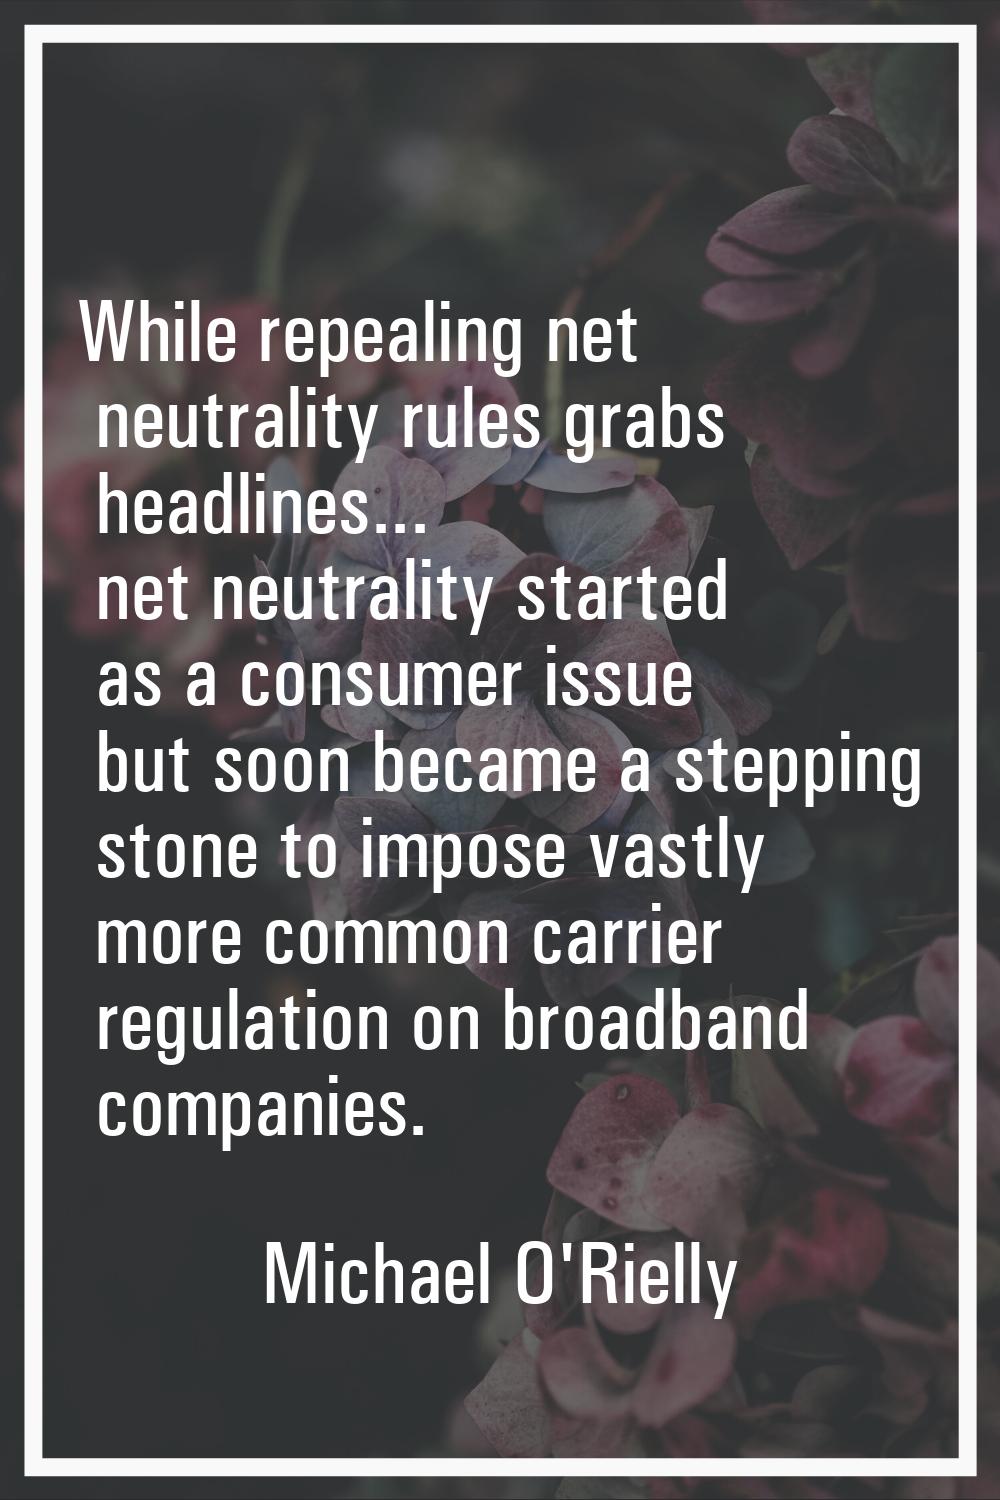 While repealing net neutrality rules grabs headlines... net neutrality started as a consumer issue 